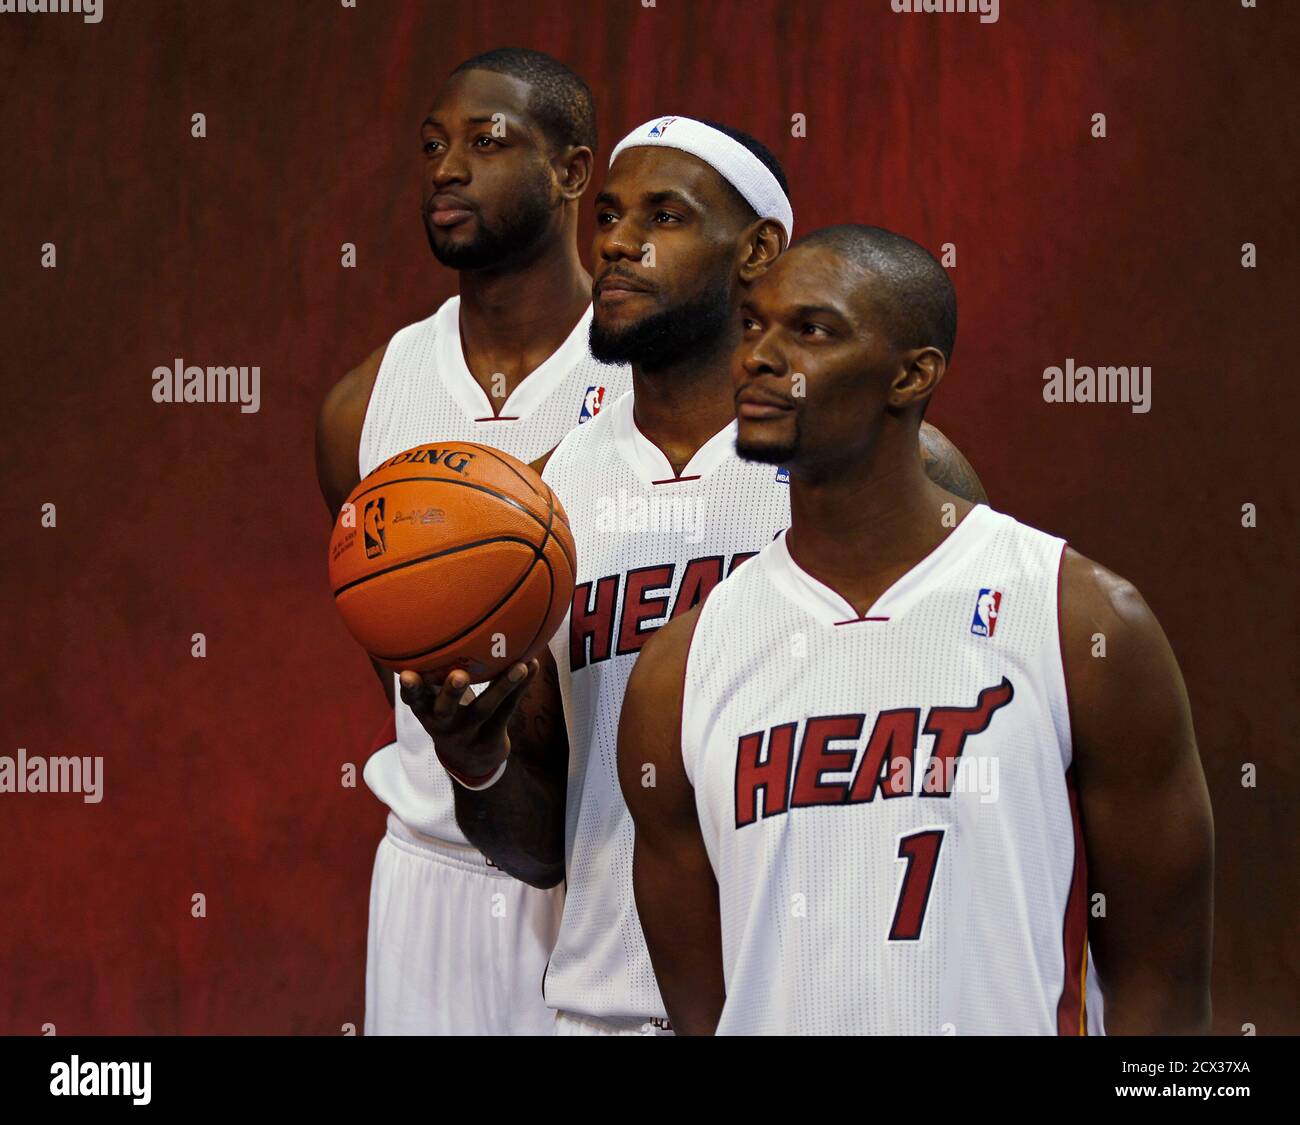 Miami Heat's Dwyane Wade (L), LeBron James (C) and Chris Bosh pose for  photographers during media day at the team's training camp in Miami,  Florida December 12, 2011. REUTERS/Hans Deryk (UNITED STATES -